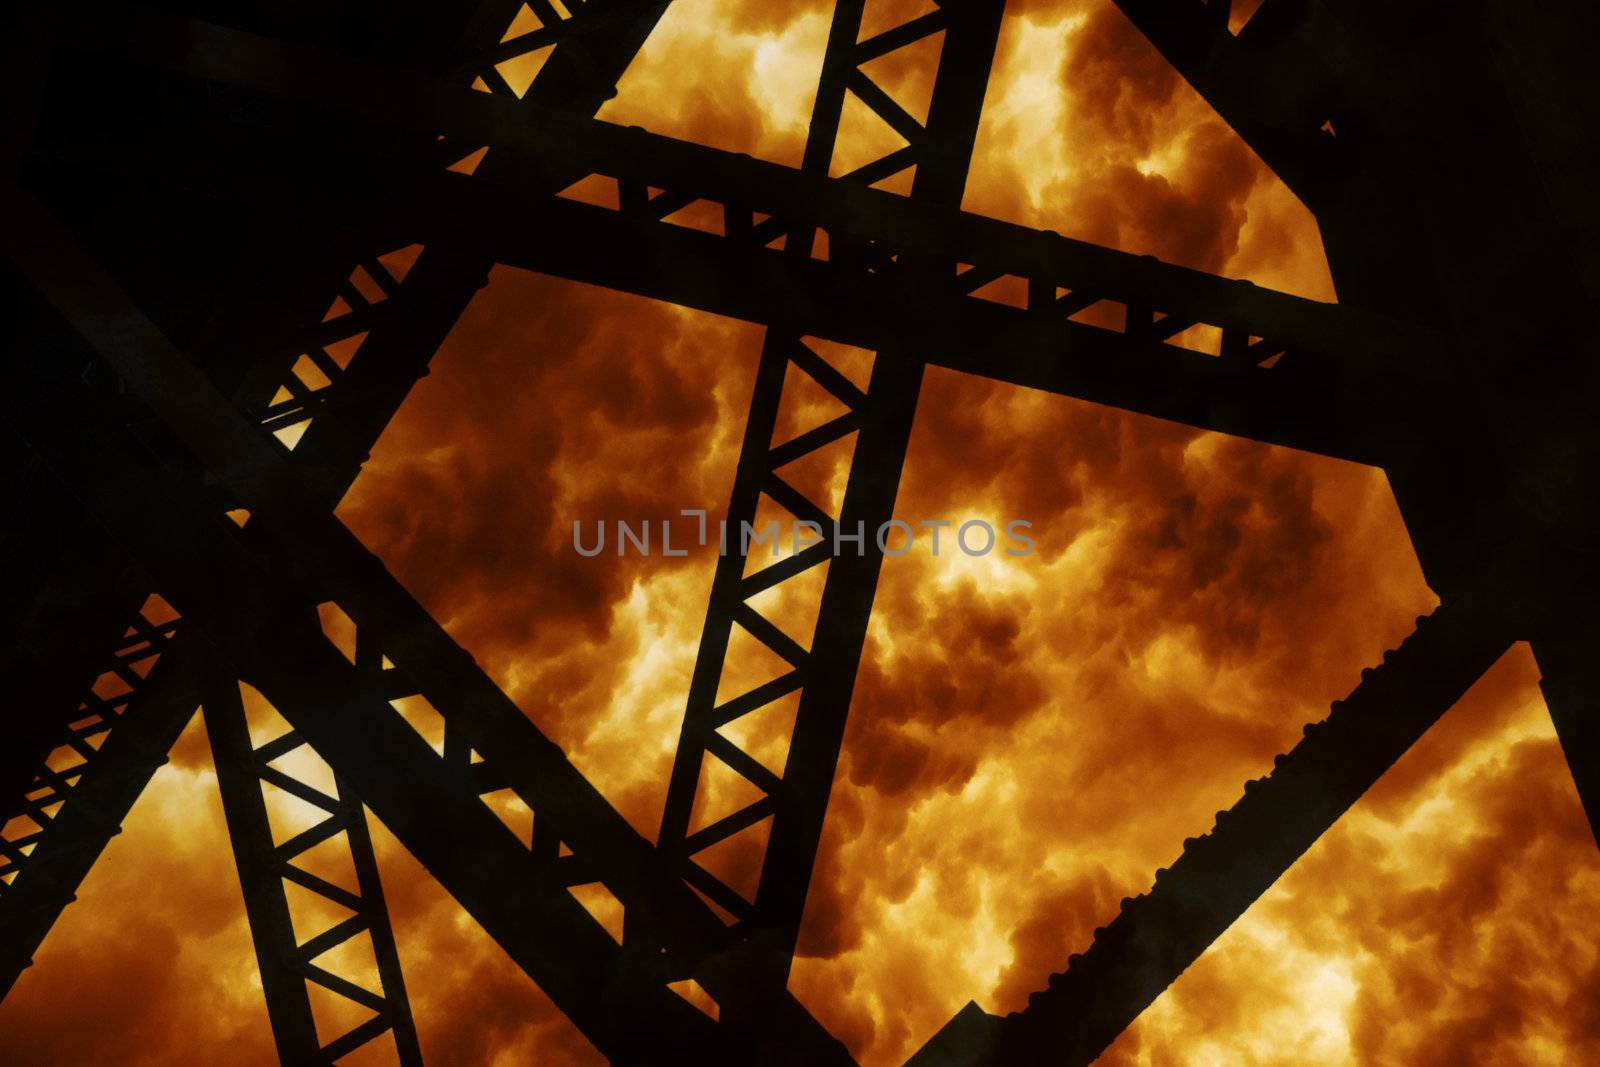 Steel Structure Silhouette of a large explosion